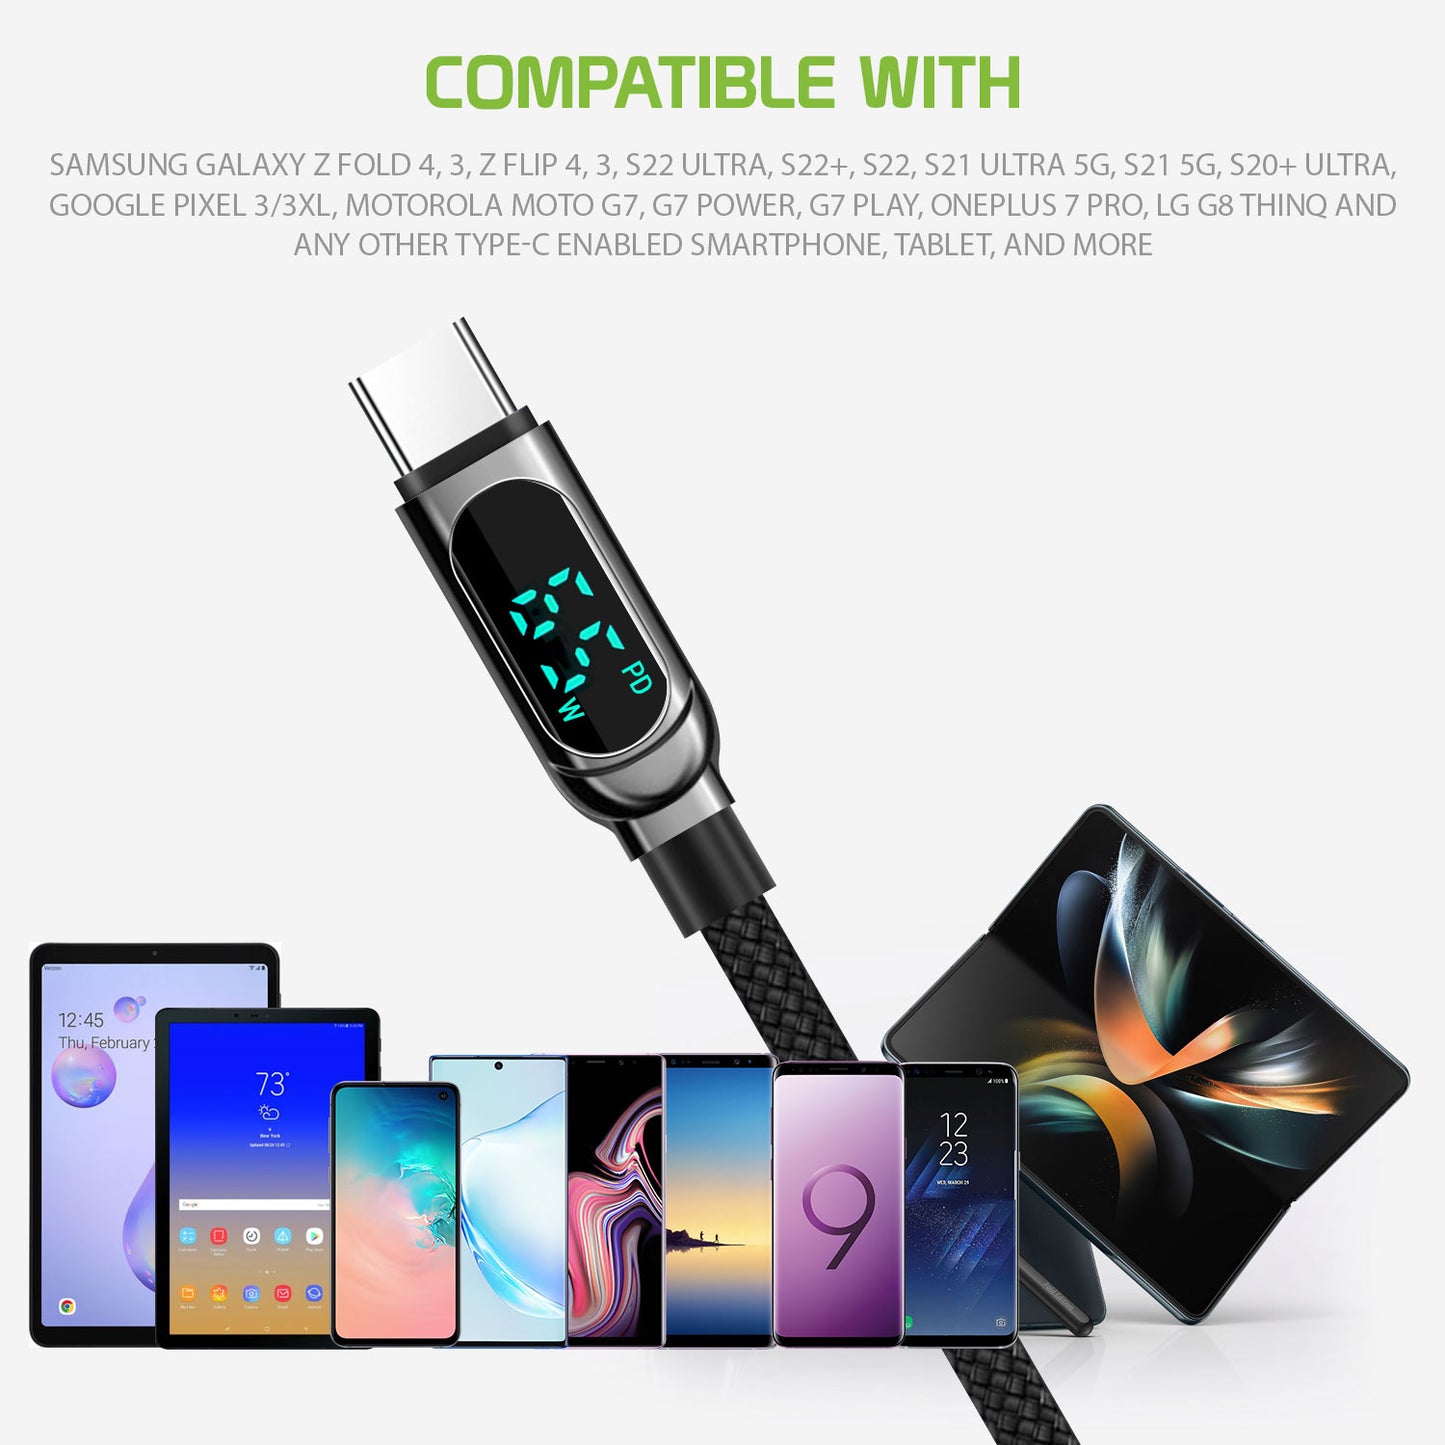 DCDCDISPBK - Phone Charging USB-C Cable, 3.3 ft. USB-C to USB-C with Digital Display Cable Compatible to Galaxy Z Fold Z Flip S22, Google Pixel, Moto